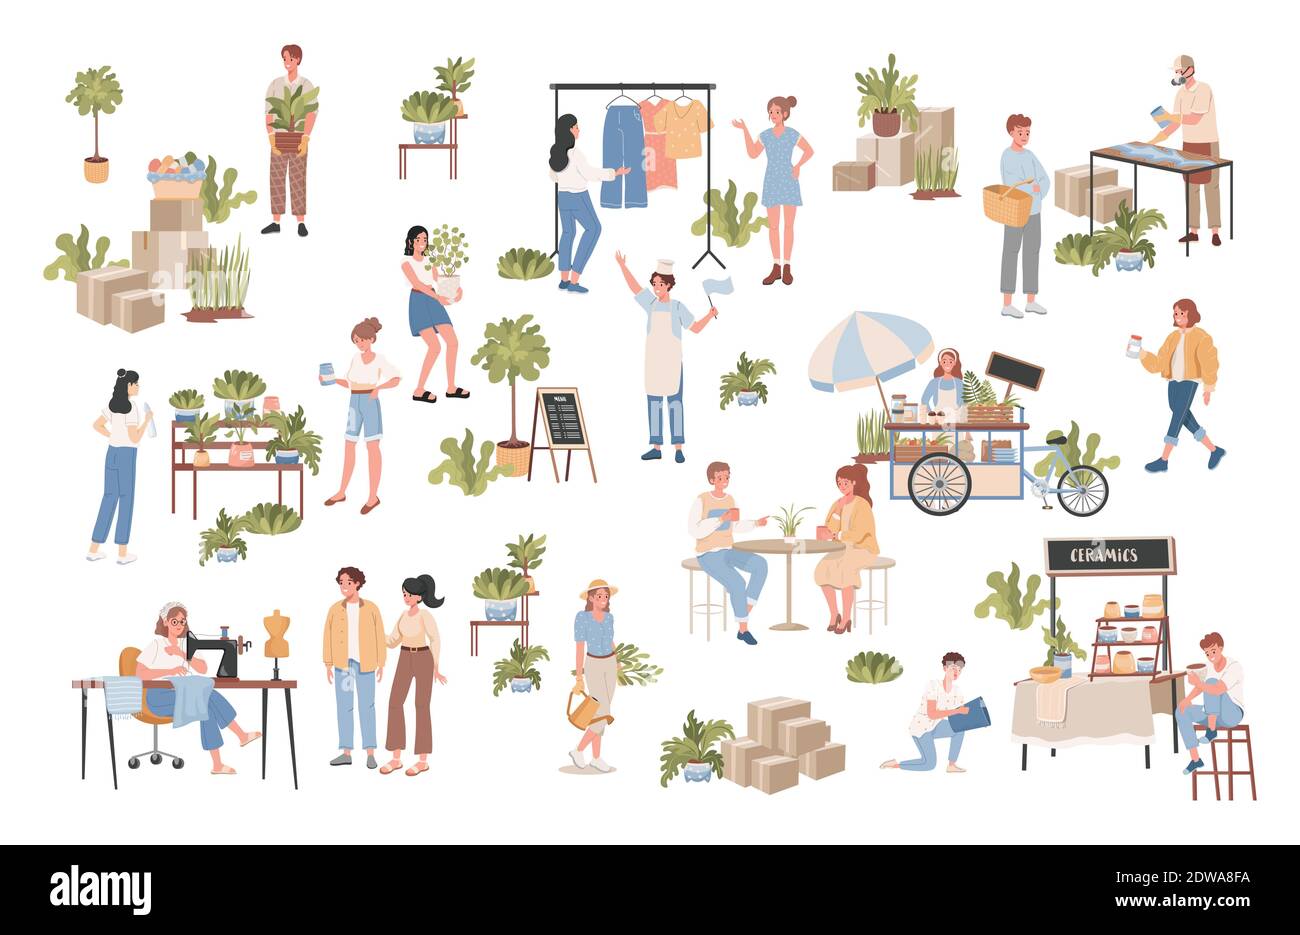 Group of happy smiling people taking care of plants, sewing clothes on sewing machine, selling street food or coffee, buying ceramic pots. Green plants, flowers and trees in pots standing on shelves. Stock Vector